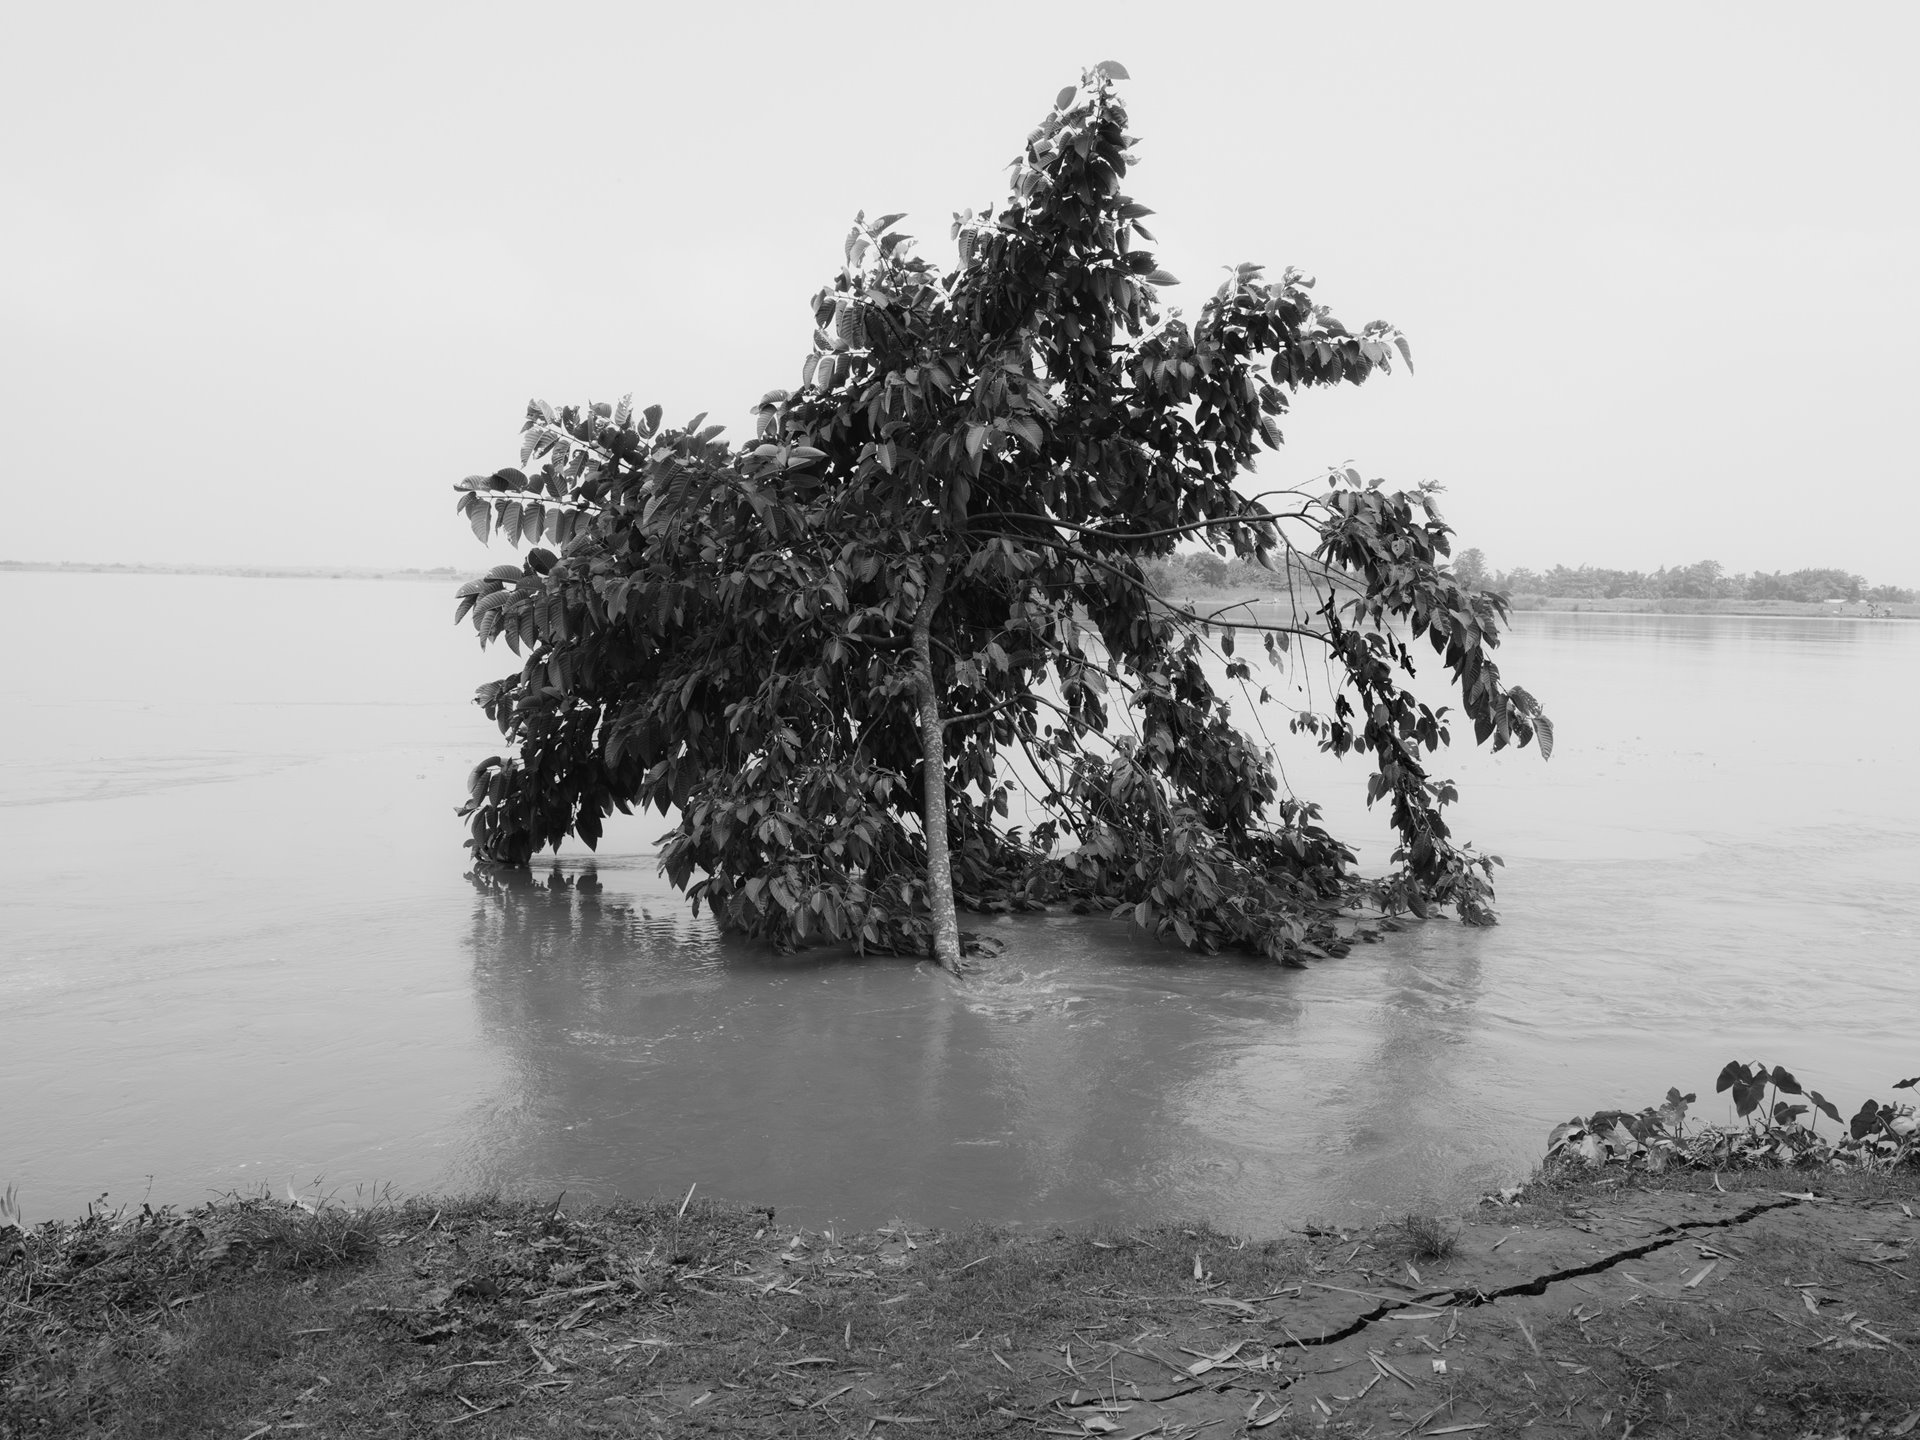 A submerged tree in the swollen Beki River. Kharbali West villagers must relocate yet again due to the dreaded annual monsoon, which engulfs villages and causes havoc. Bengali Muslims living along one of the many tributaries of the Brahmaputra often see their land vanish, relocating every few years due to the aggressive river&#39;s shifts, exacerbated by release of dam water from Bhutan. Downstream, in Barpeta district, the Bengali Muslim communities continue to grapple with citizenship challenges after NRC exclusion, facing the possibility of statelessness. Kharbali, Barpeta, Lower Assam, India.